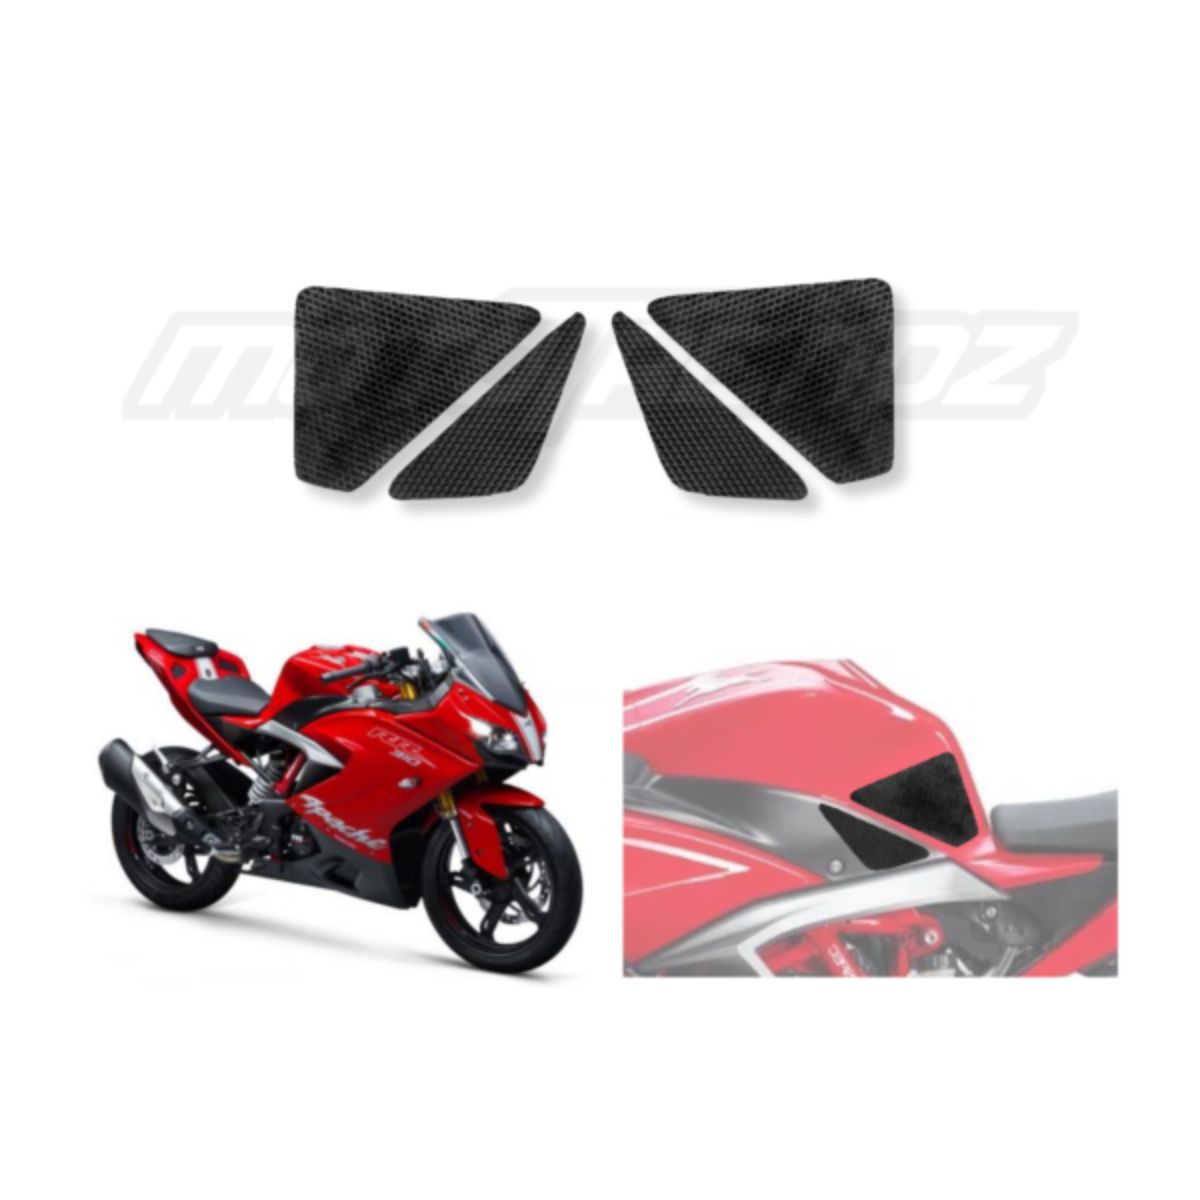 Traction Pads for TVS Apache RR 310 3